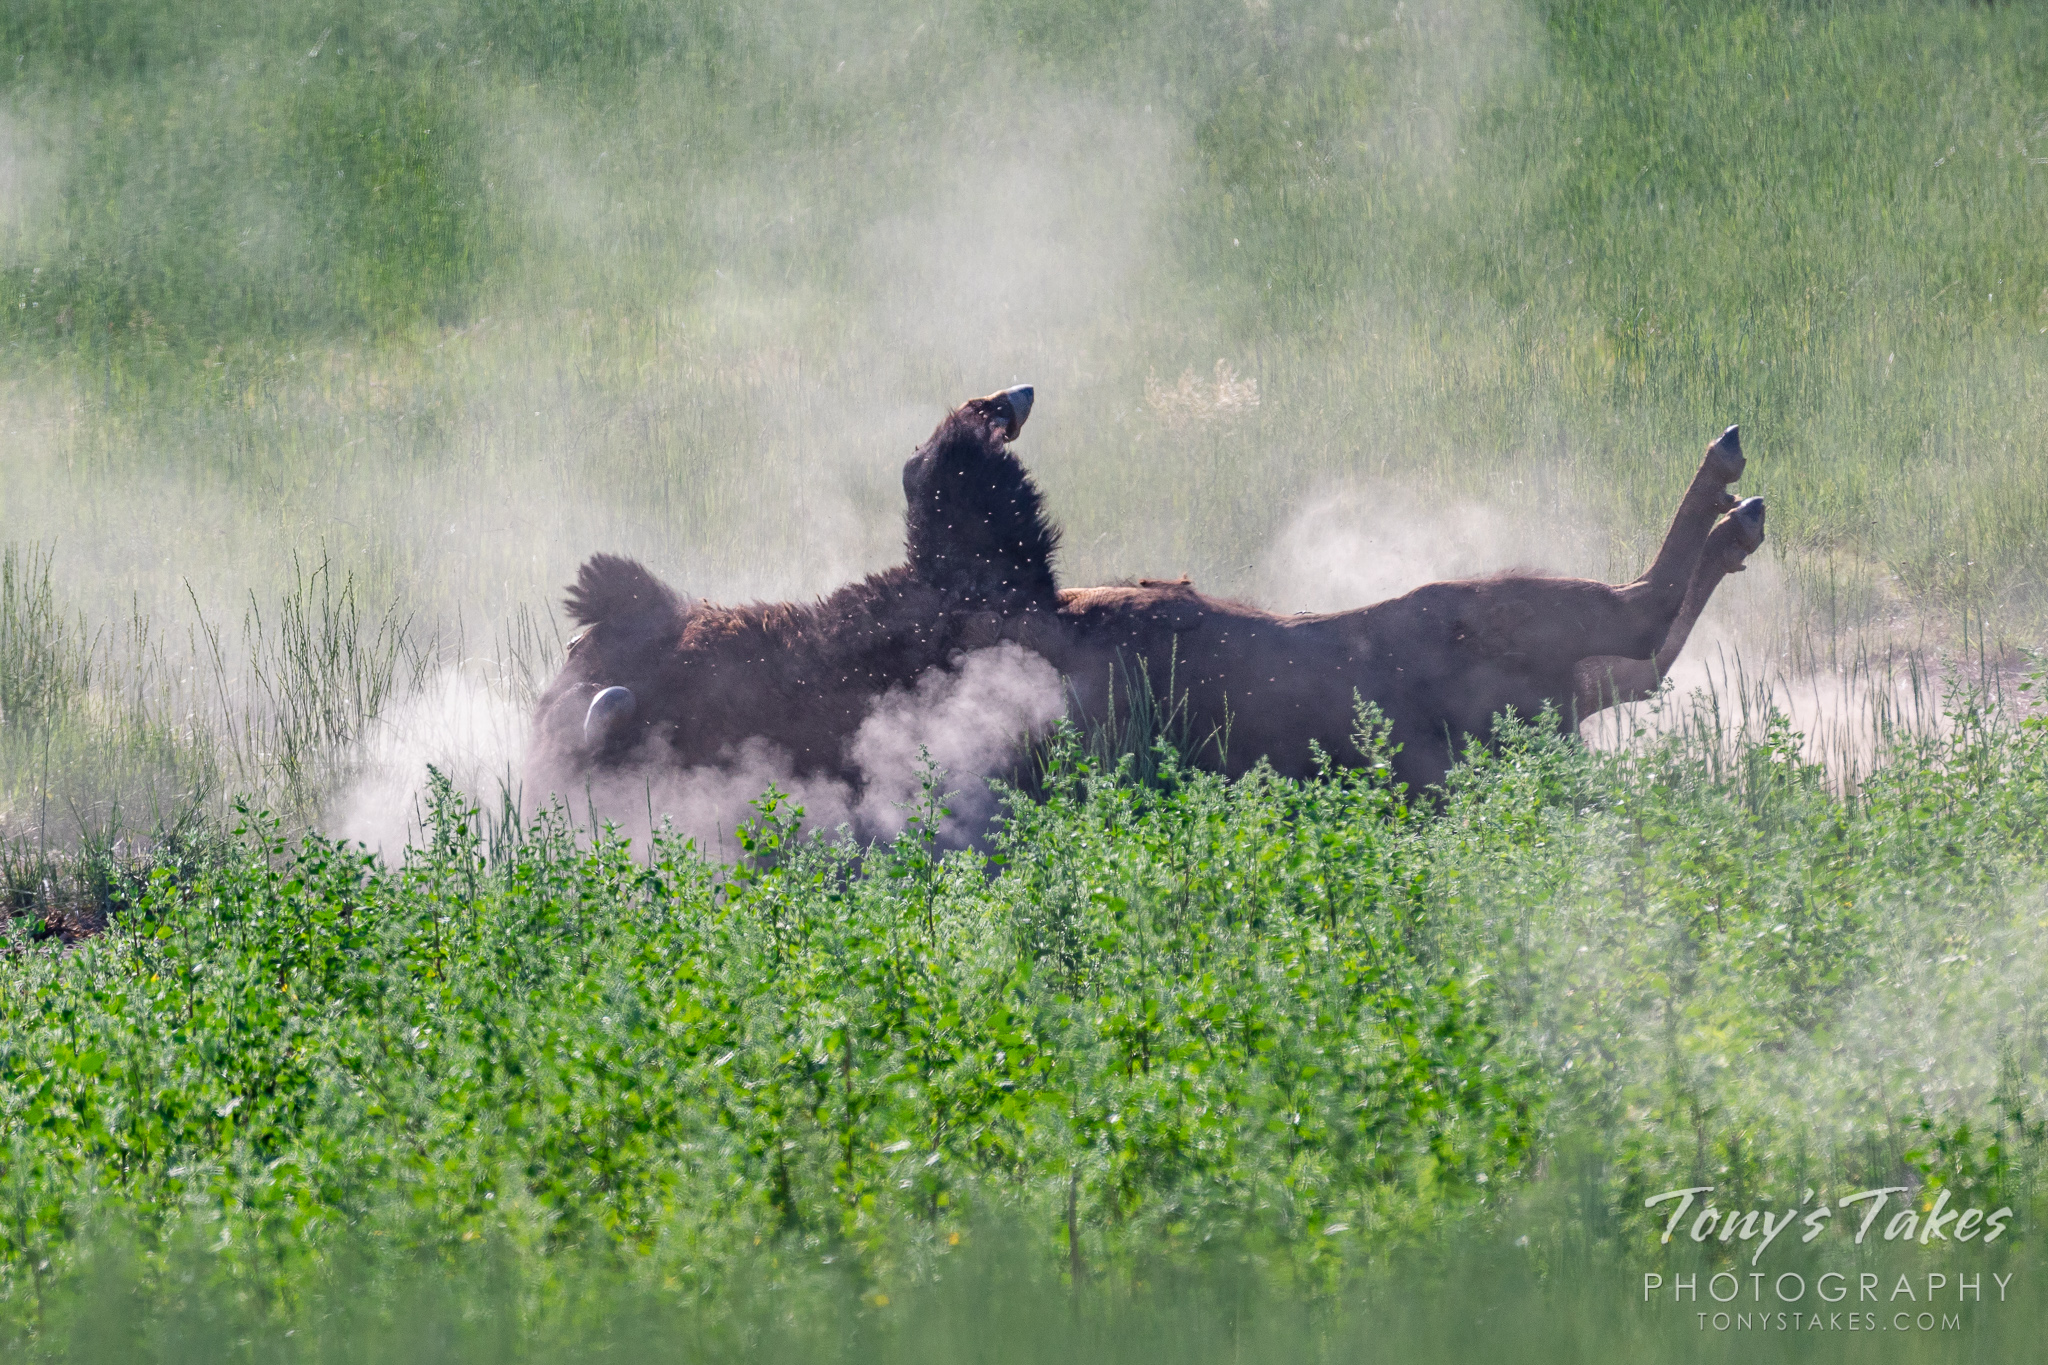 A bison bull rolls in the dirt to try to rid itself of its winter coat. (© Tony’s Takes)